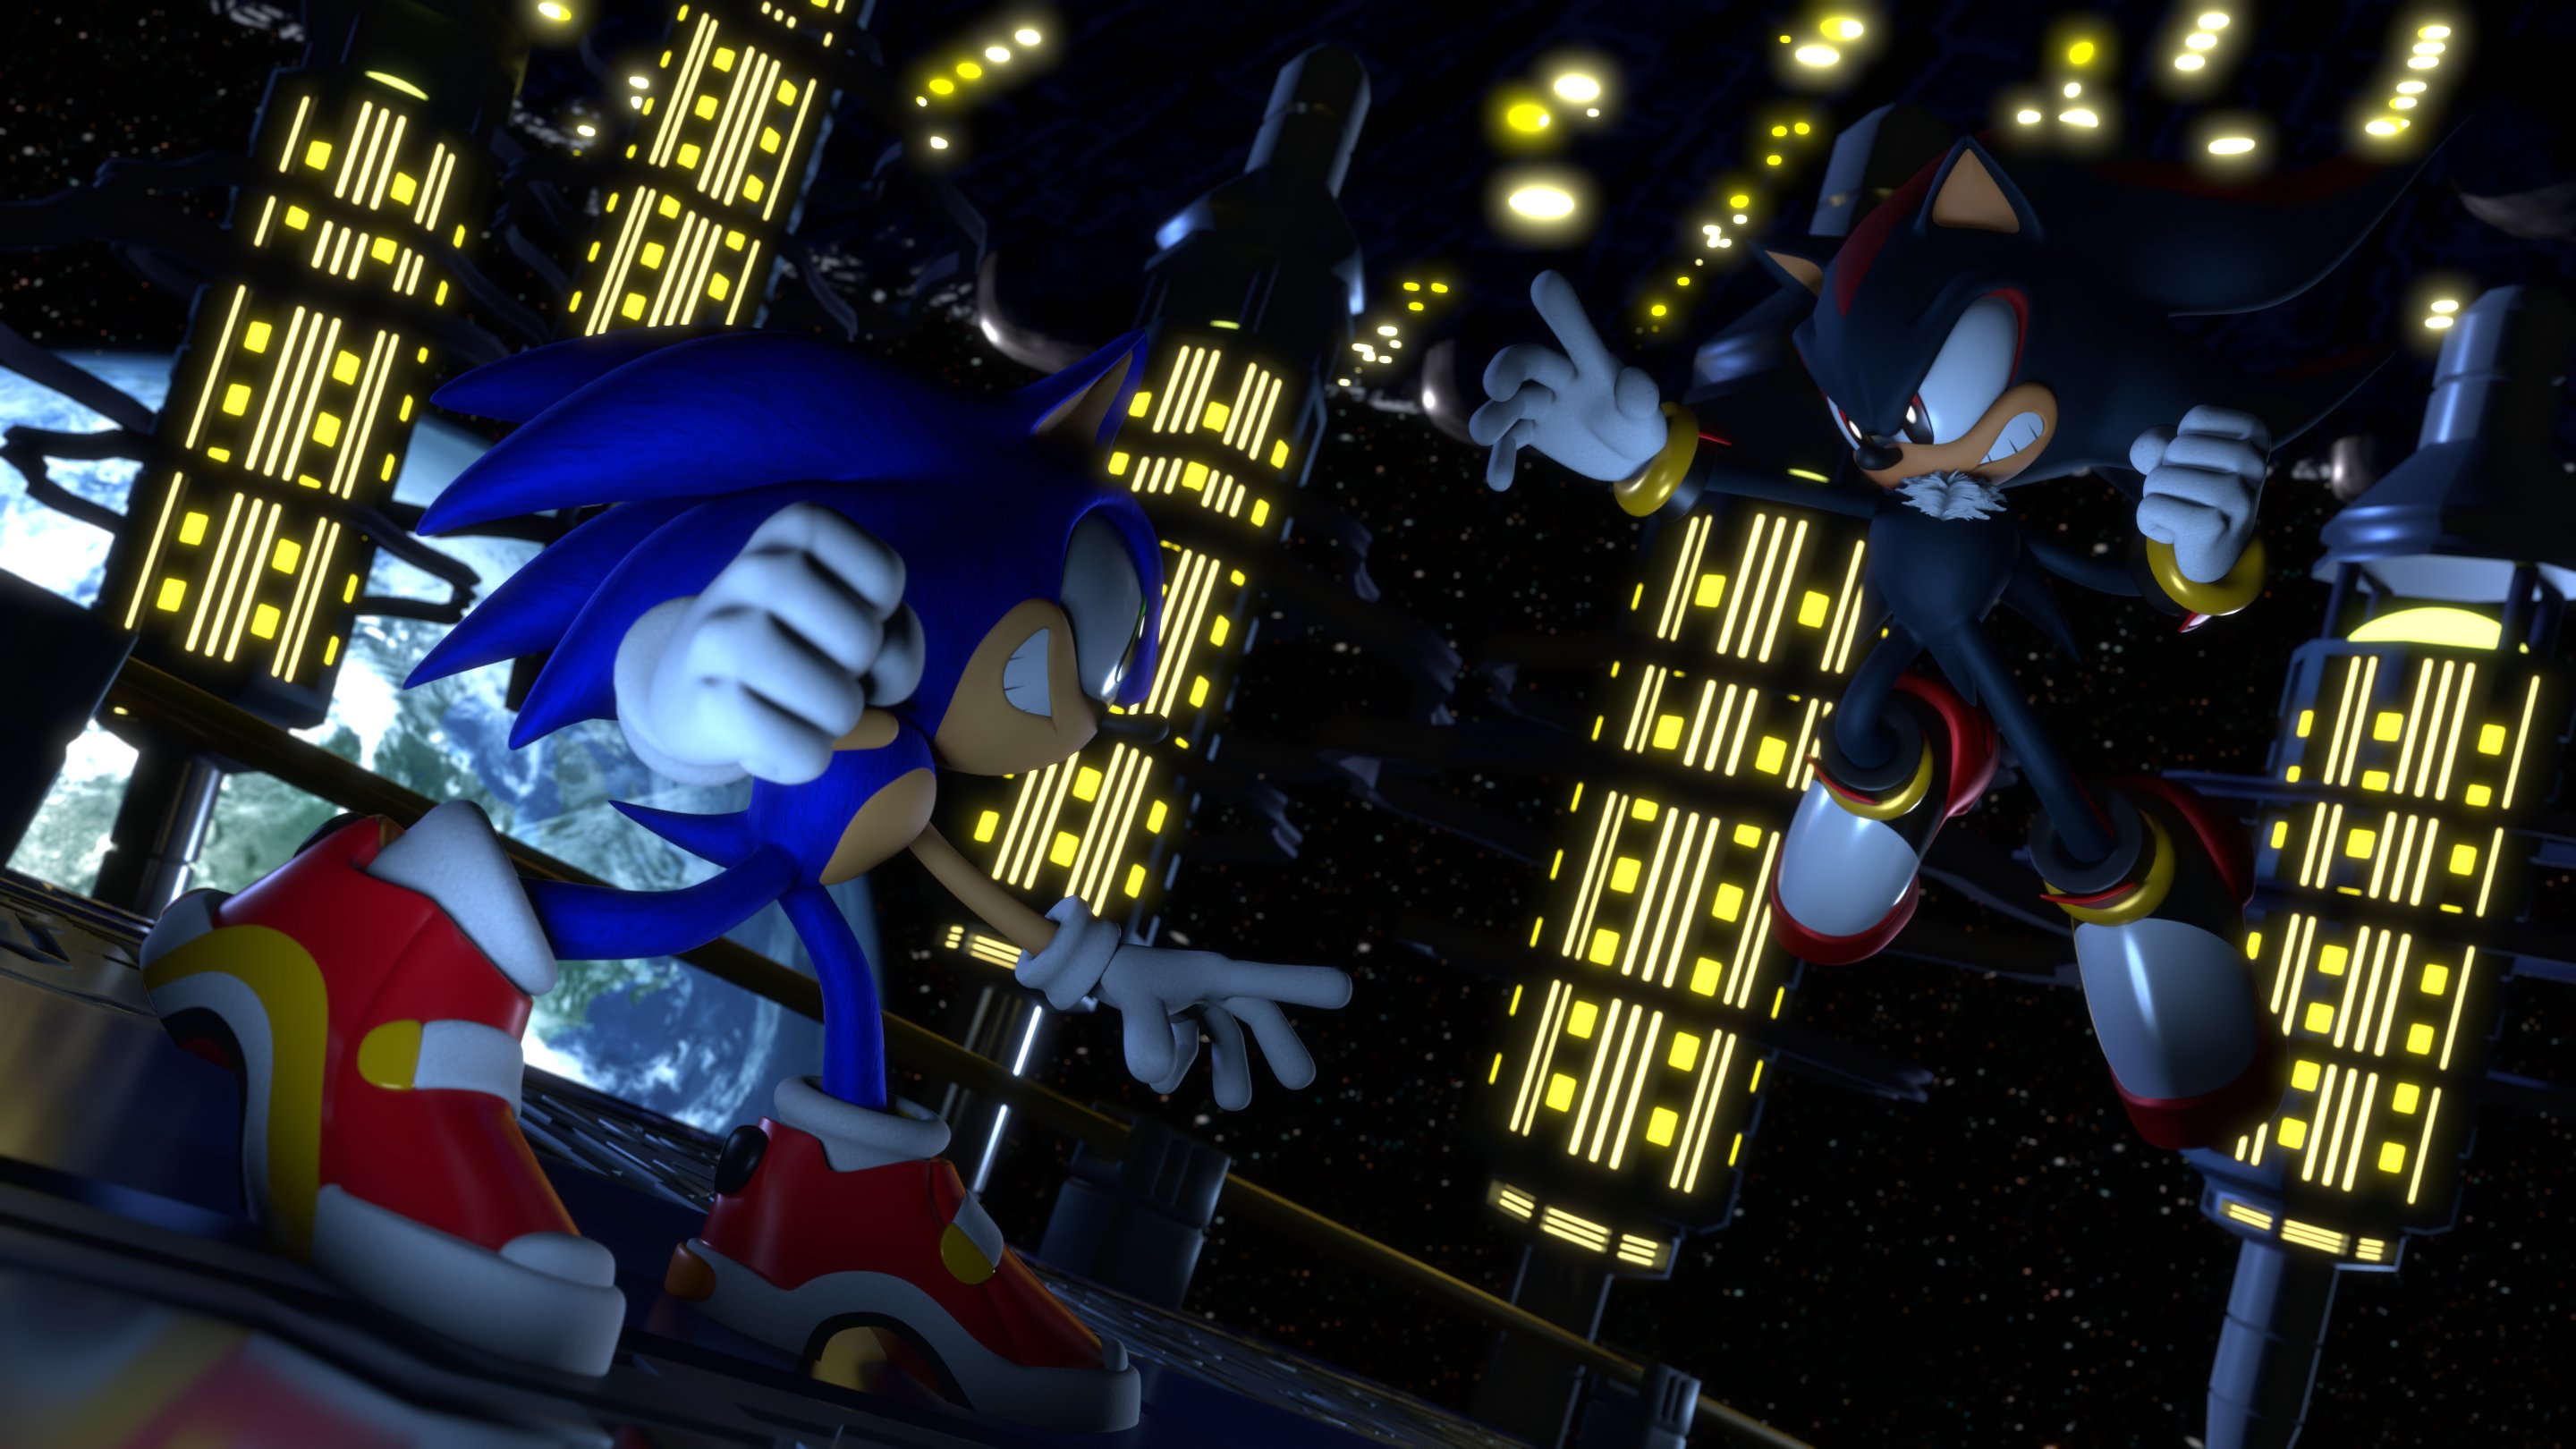 AeroArtwork✰ on X: Finished another Classic Sonic render! This